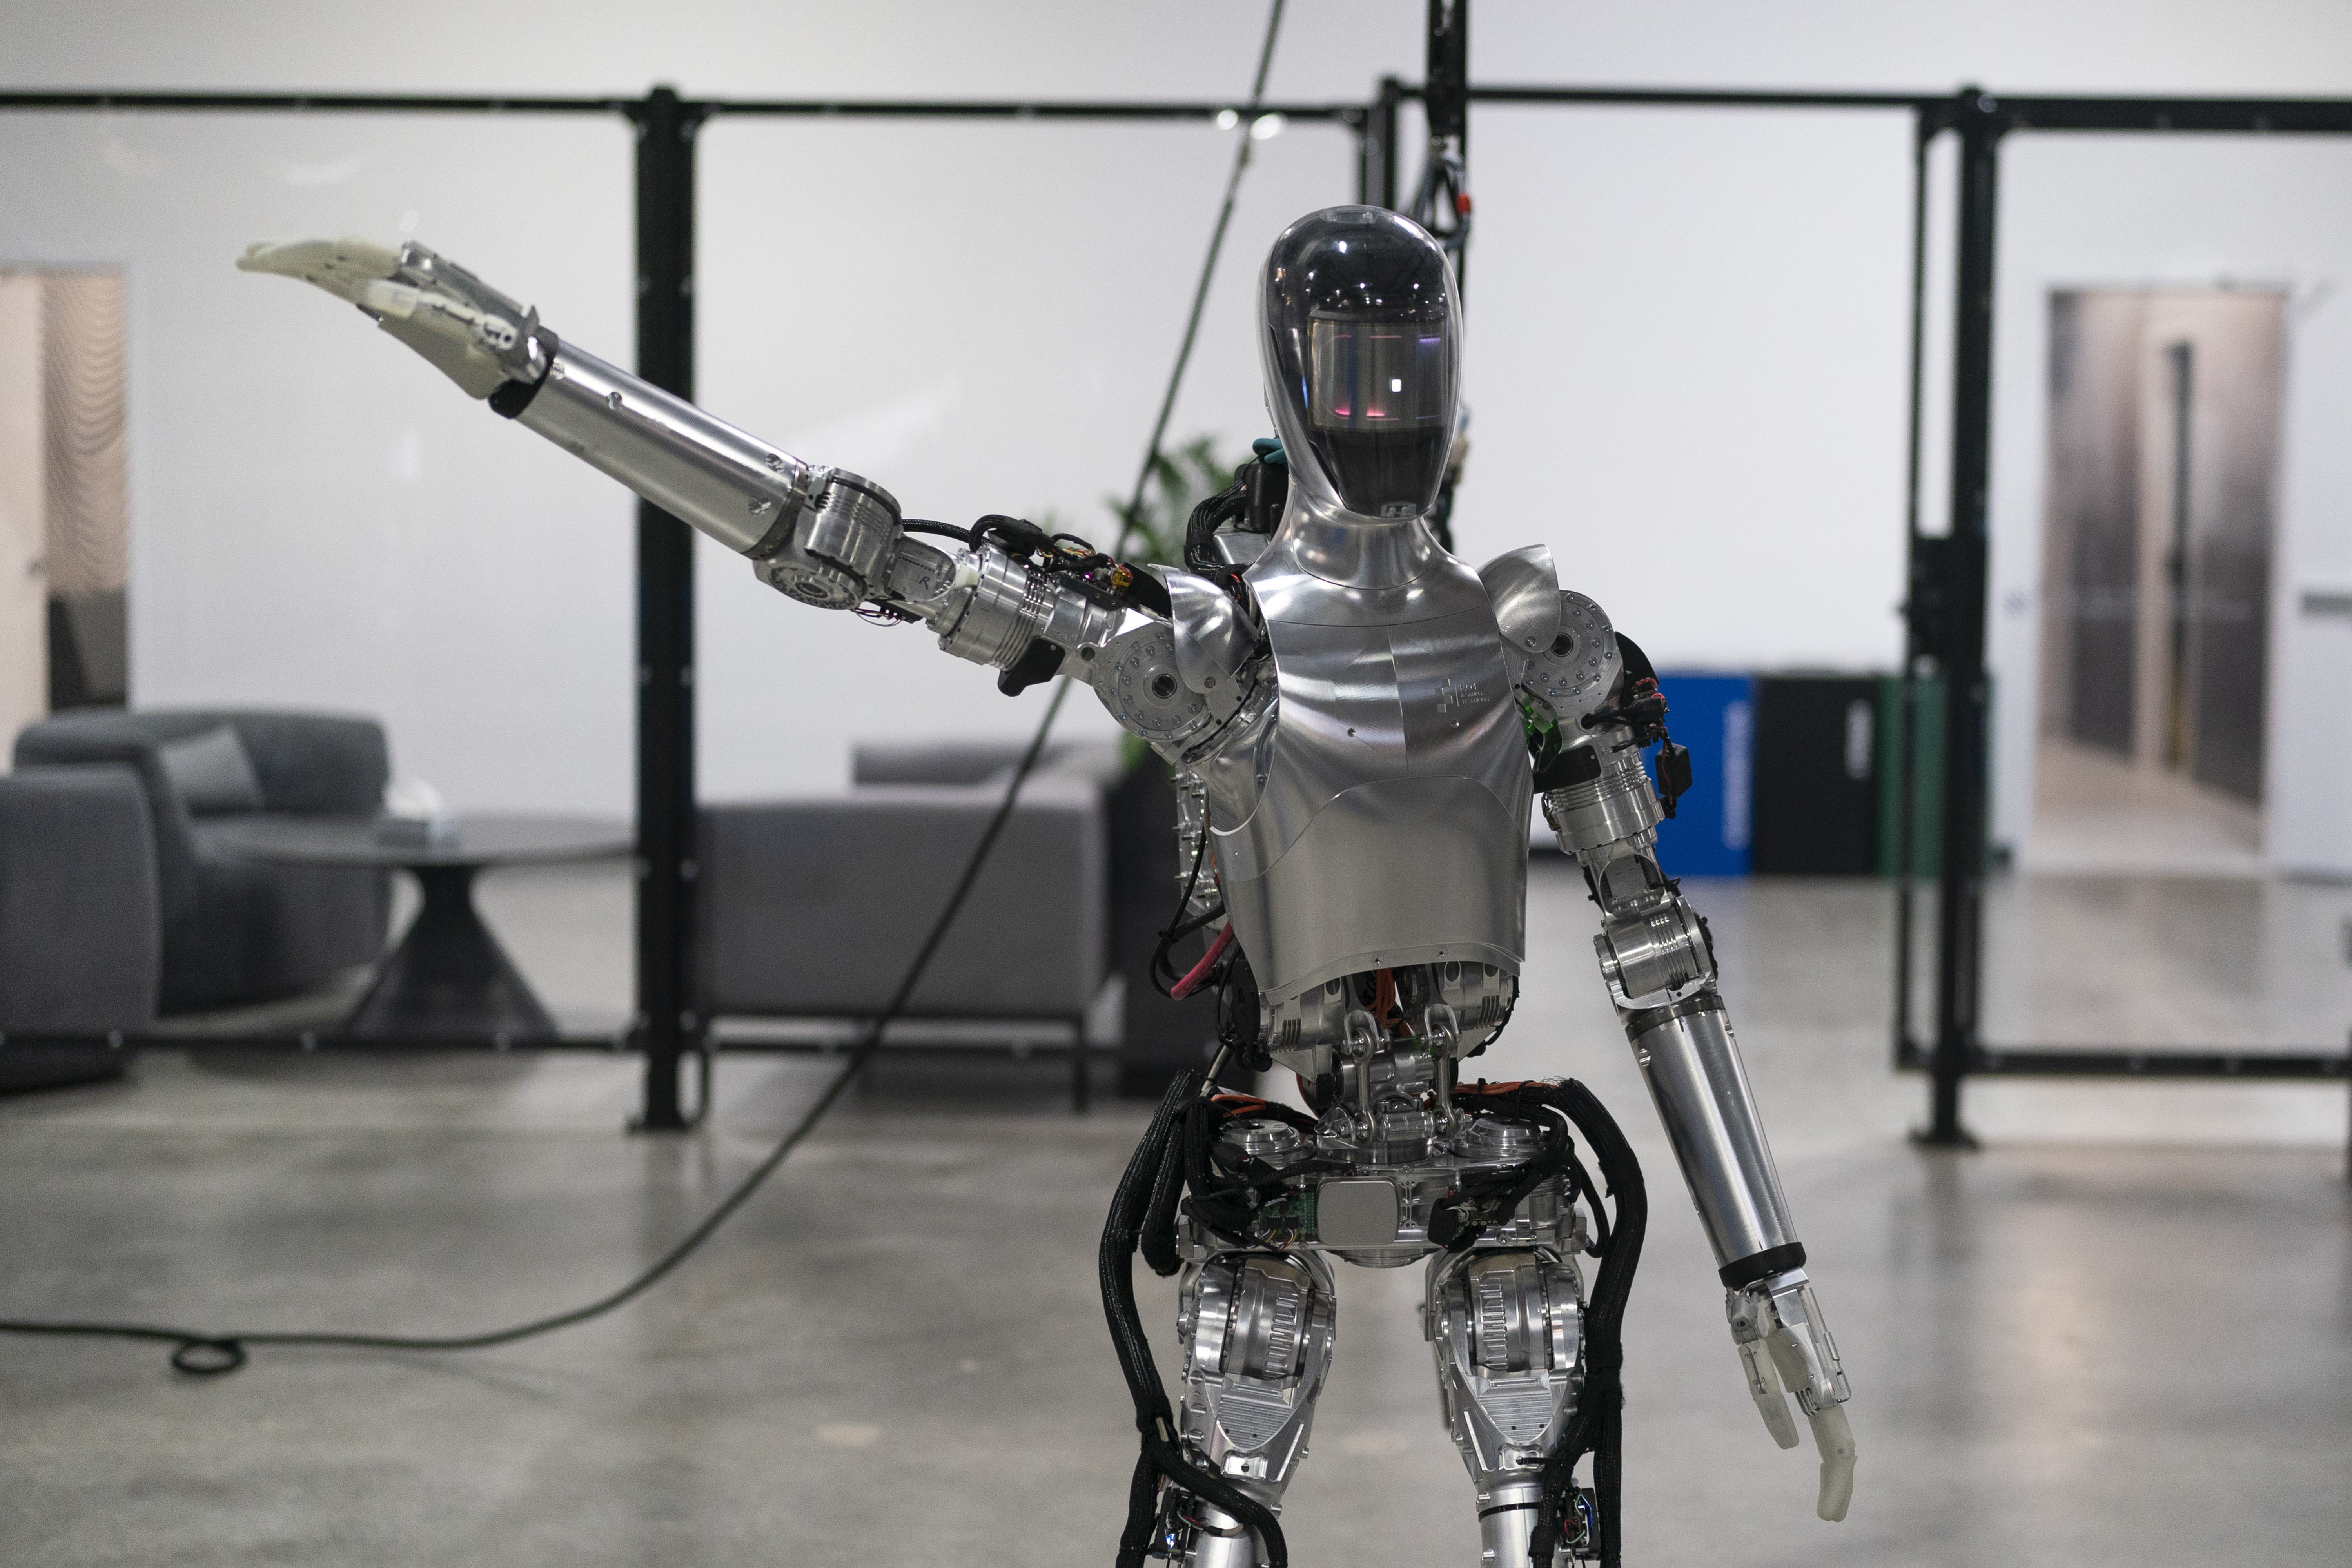 Humanoid robots are here, but they're a little awkward. Do we need